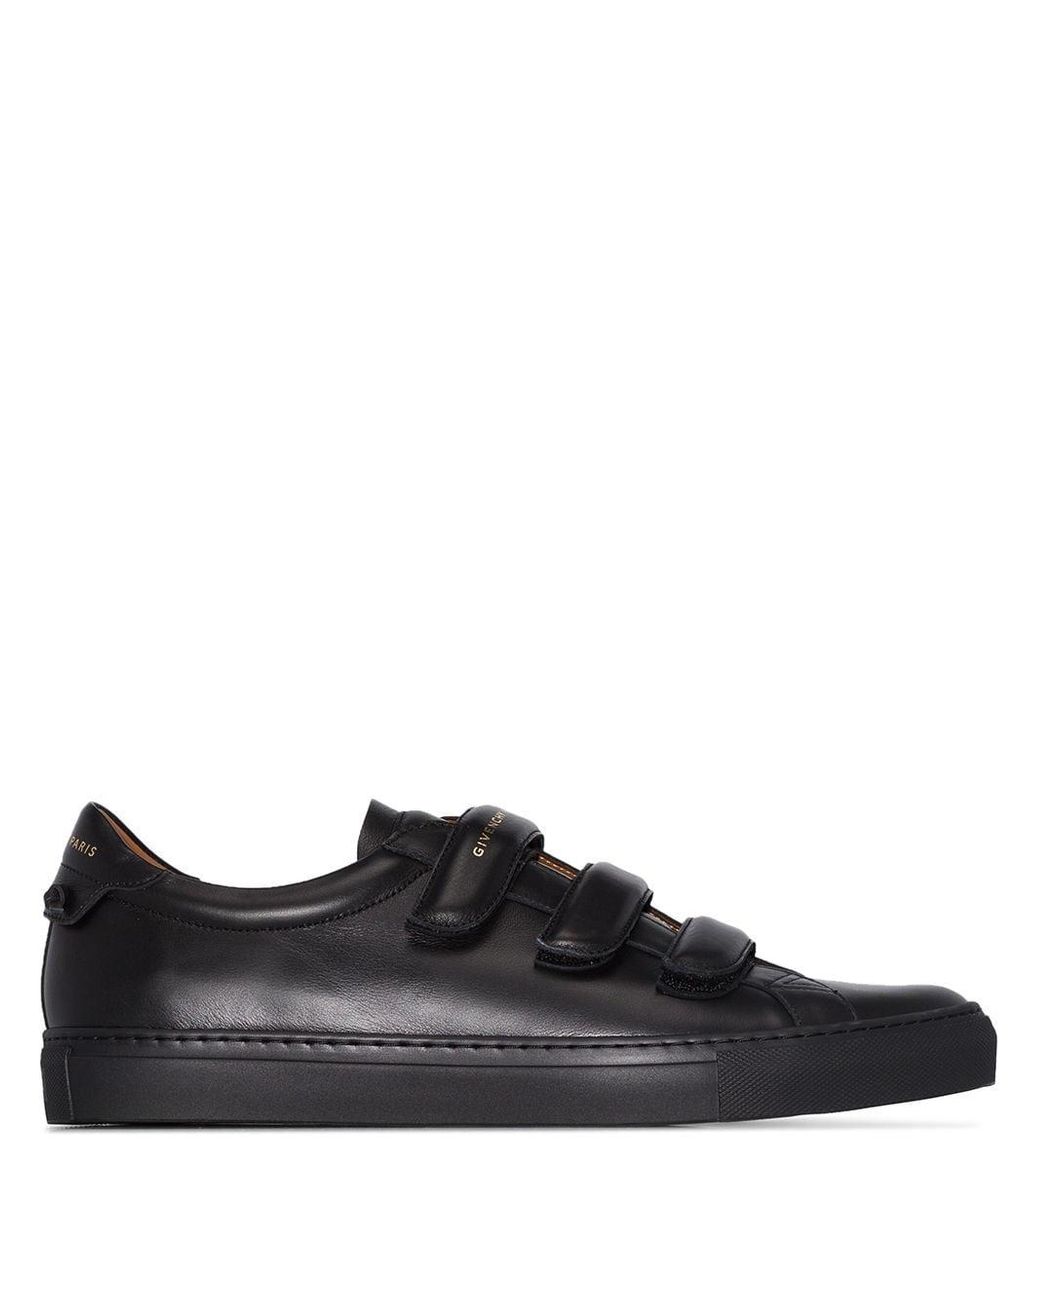 Givenchy Urban Street Velcro Strap Sneakers in Black for Men | Lyst Canada